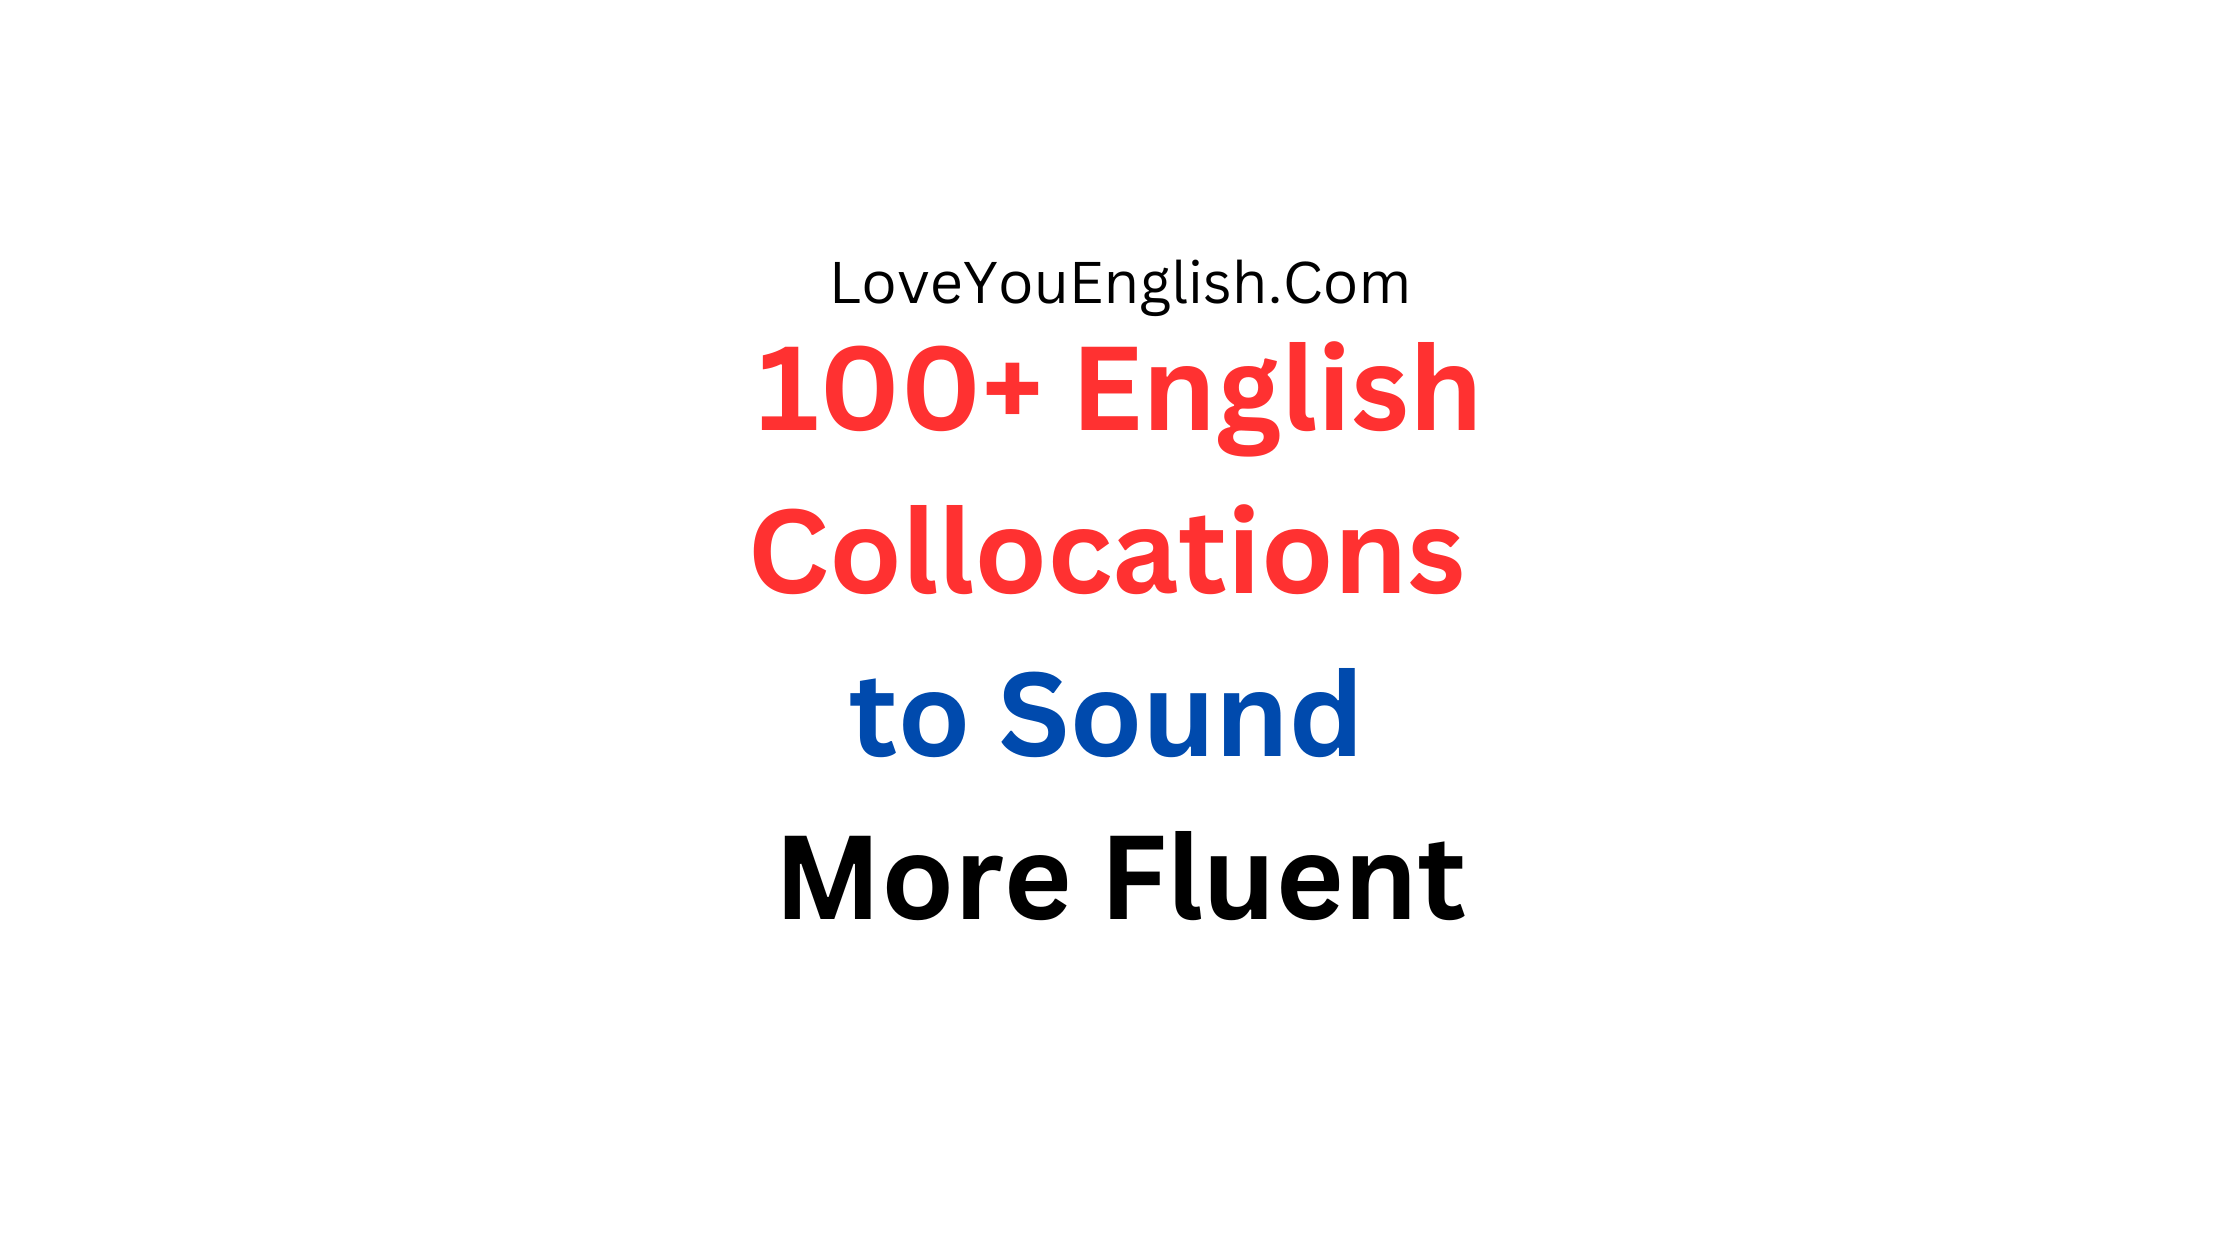 100+ English Collocations to Sound More Fluent